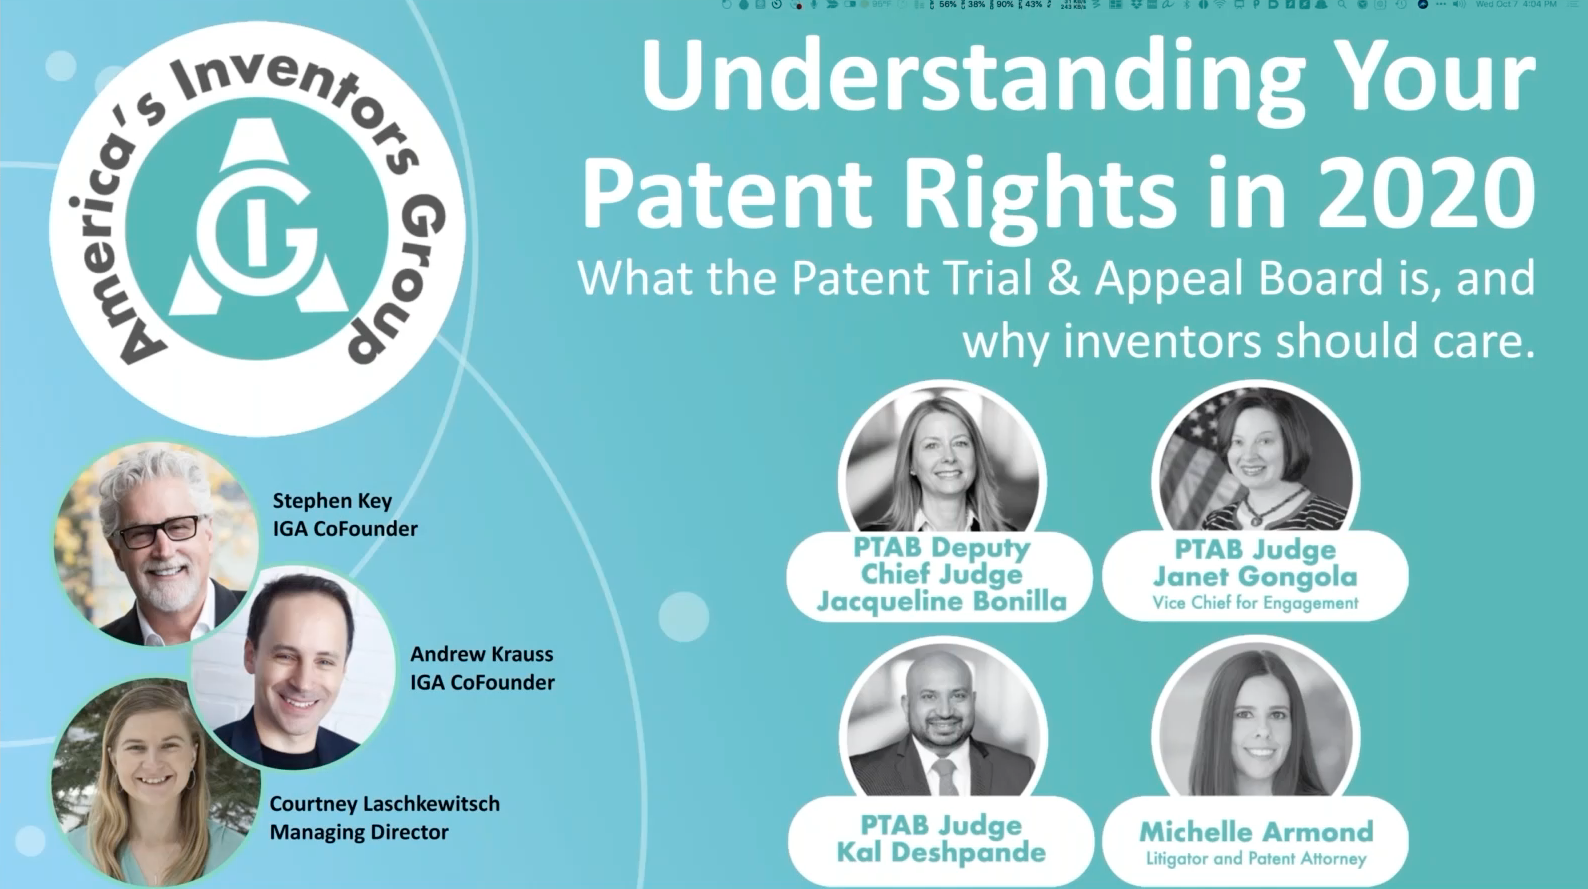 <h3><strong>Understanding Your Patent Rights in 2020!</strong></h3>